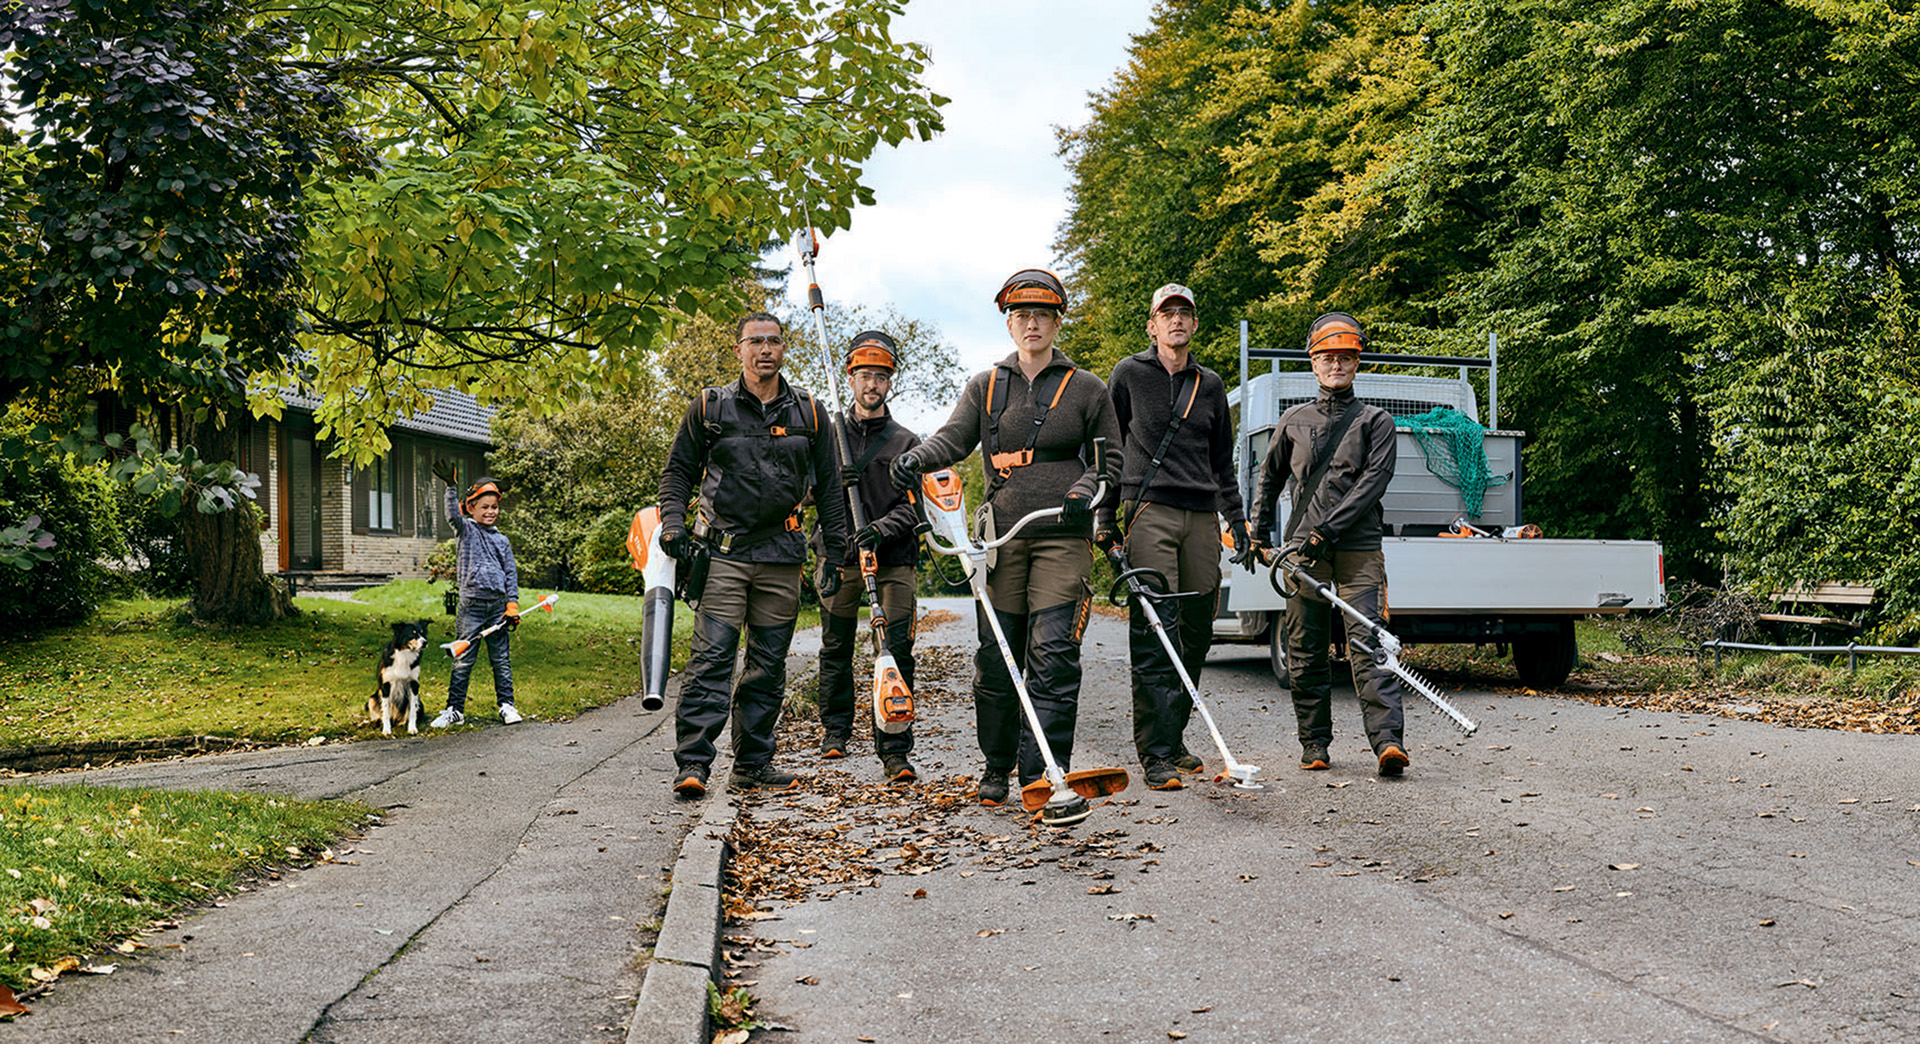 A gardening and landscaping team with STIHL professional cordless tools walks down a street.